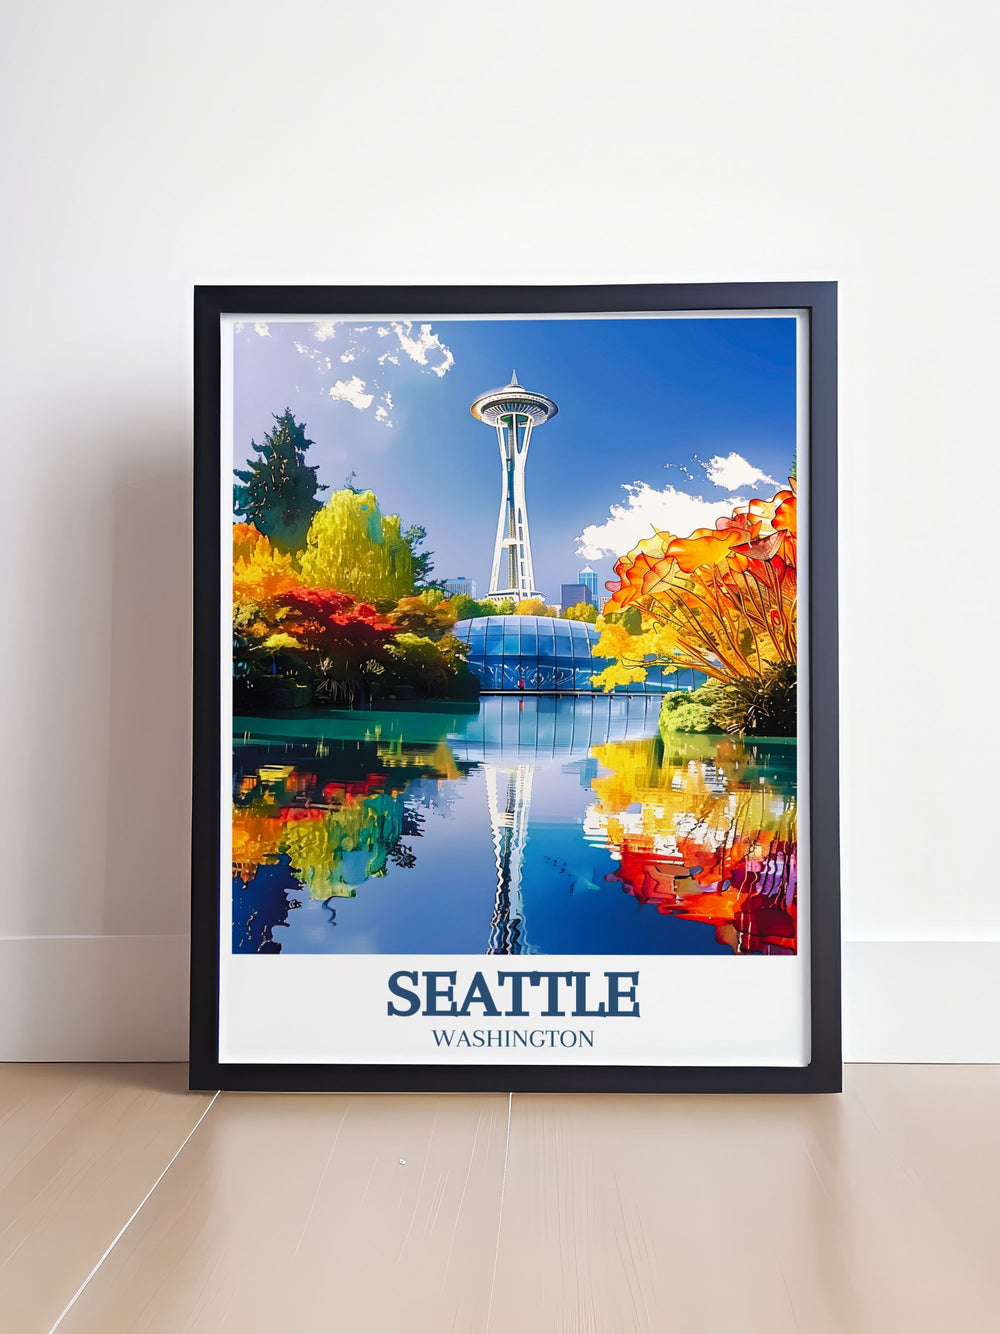 Bring the beauty of Seattles Chihuly Garden and Glass and the Summit at Snoqualmie into your home with this detailed poster, capturing the diverse attractions and scenic vistas of these famous sites.